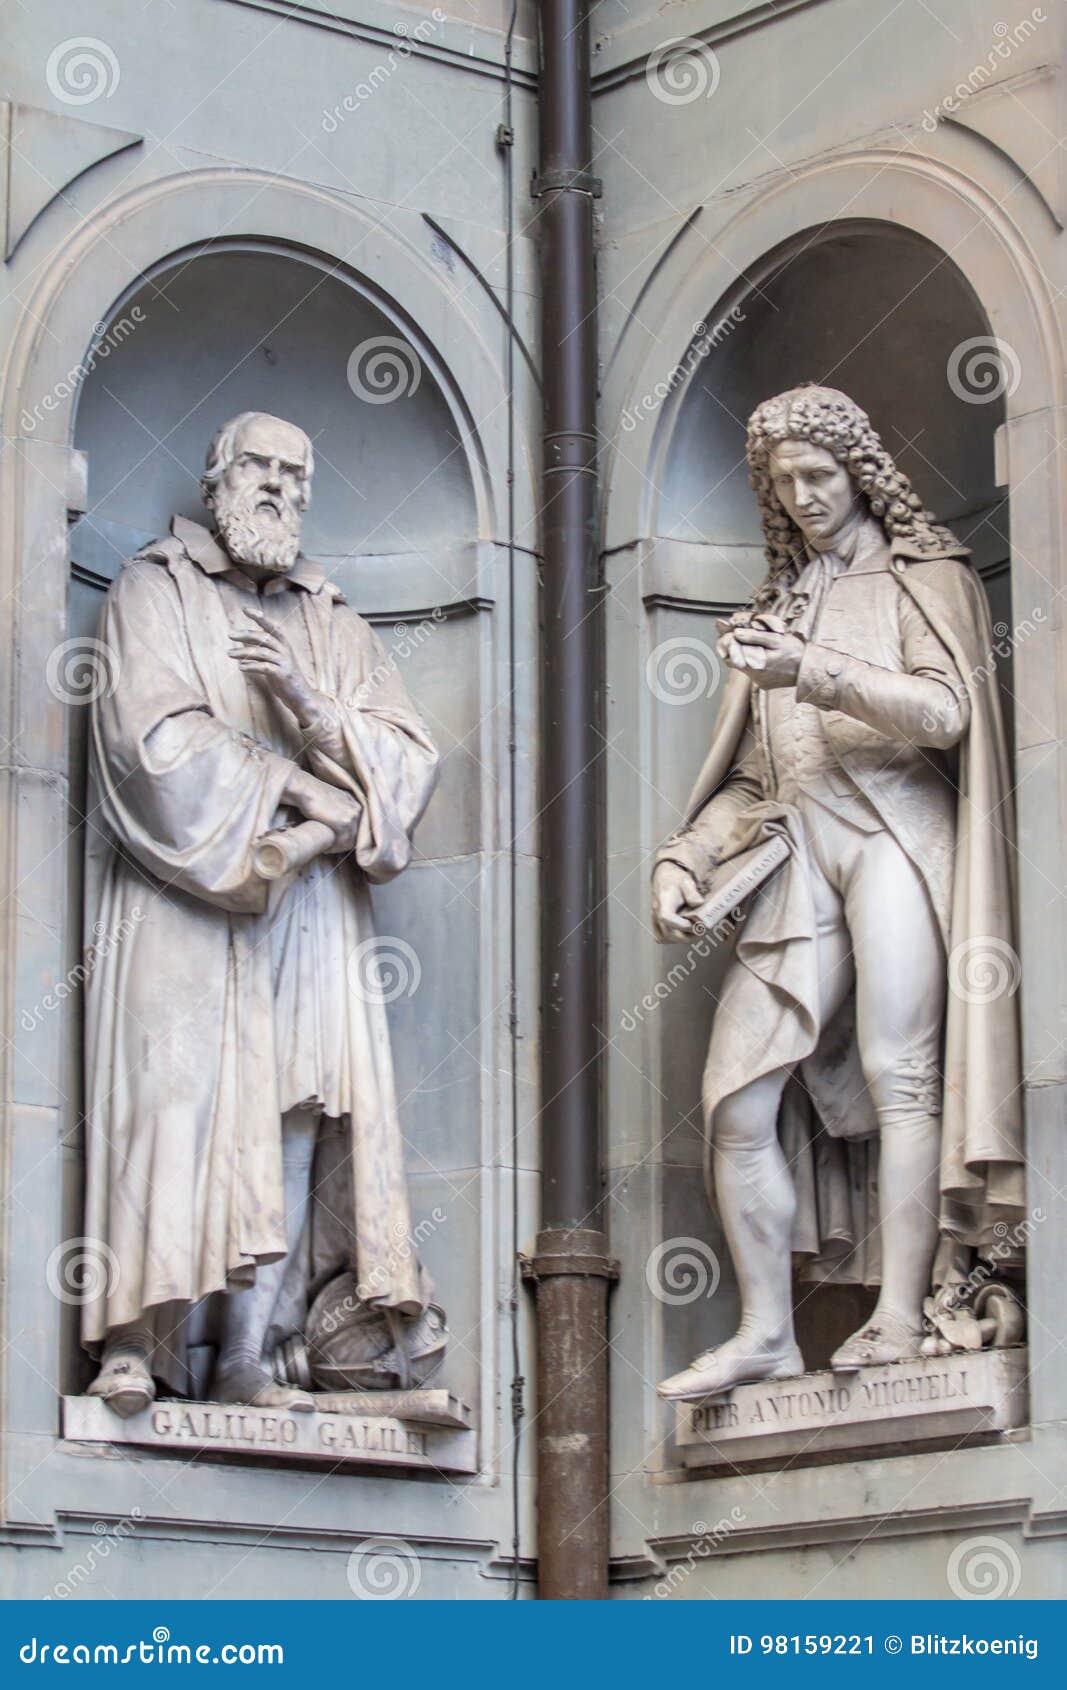 sculptures of the galileo galilei and pier antonio micheli, florence, italy